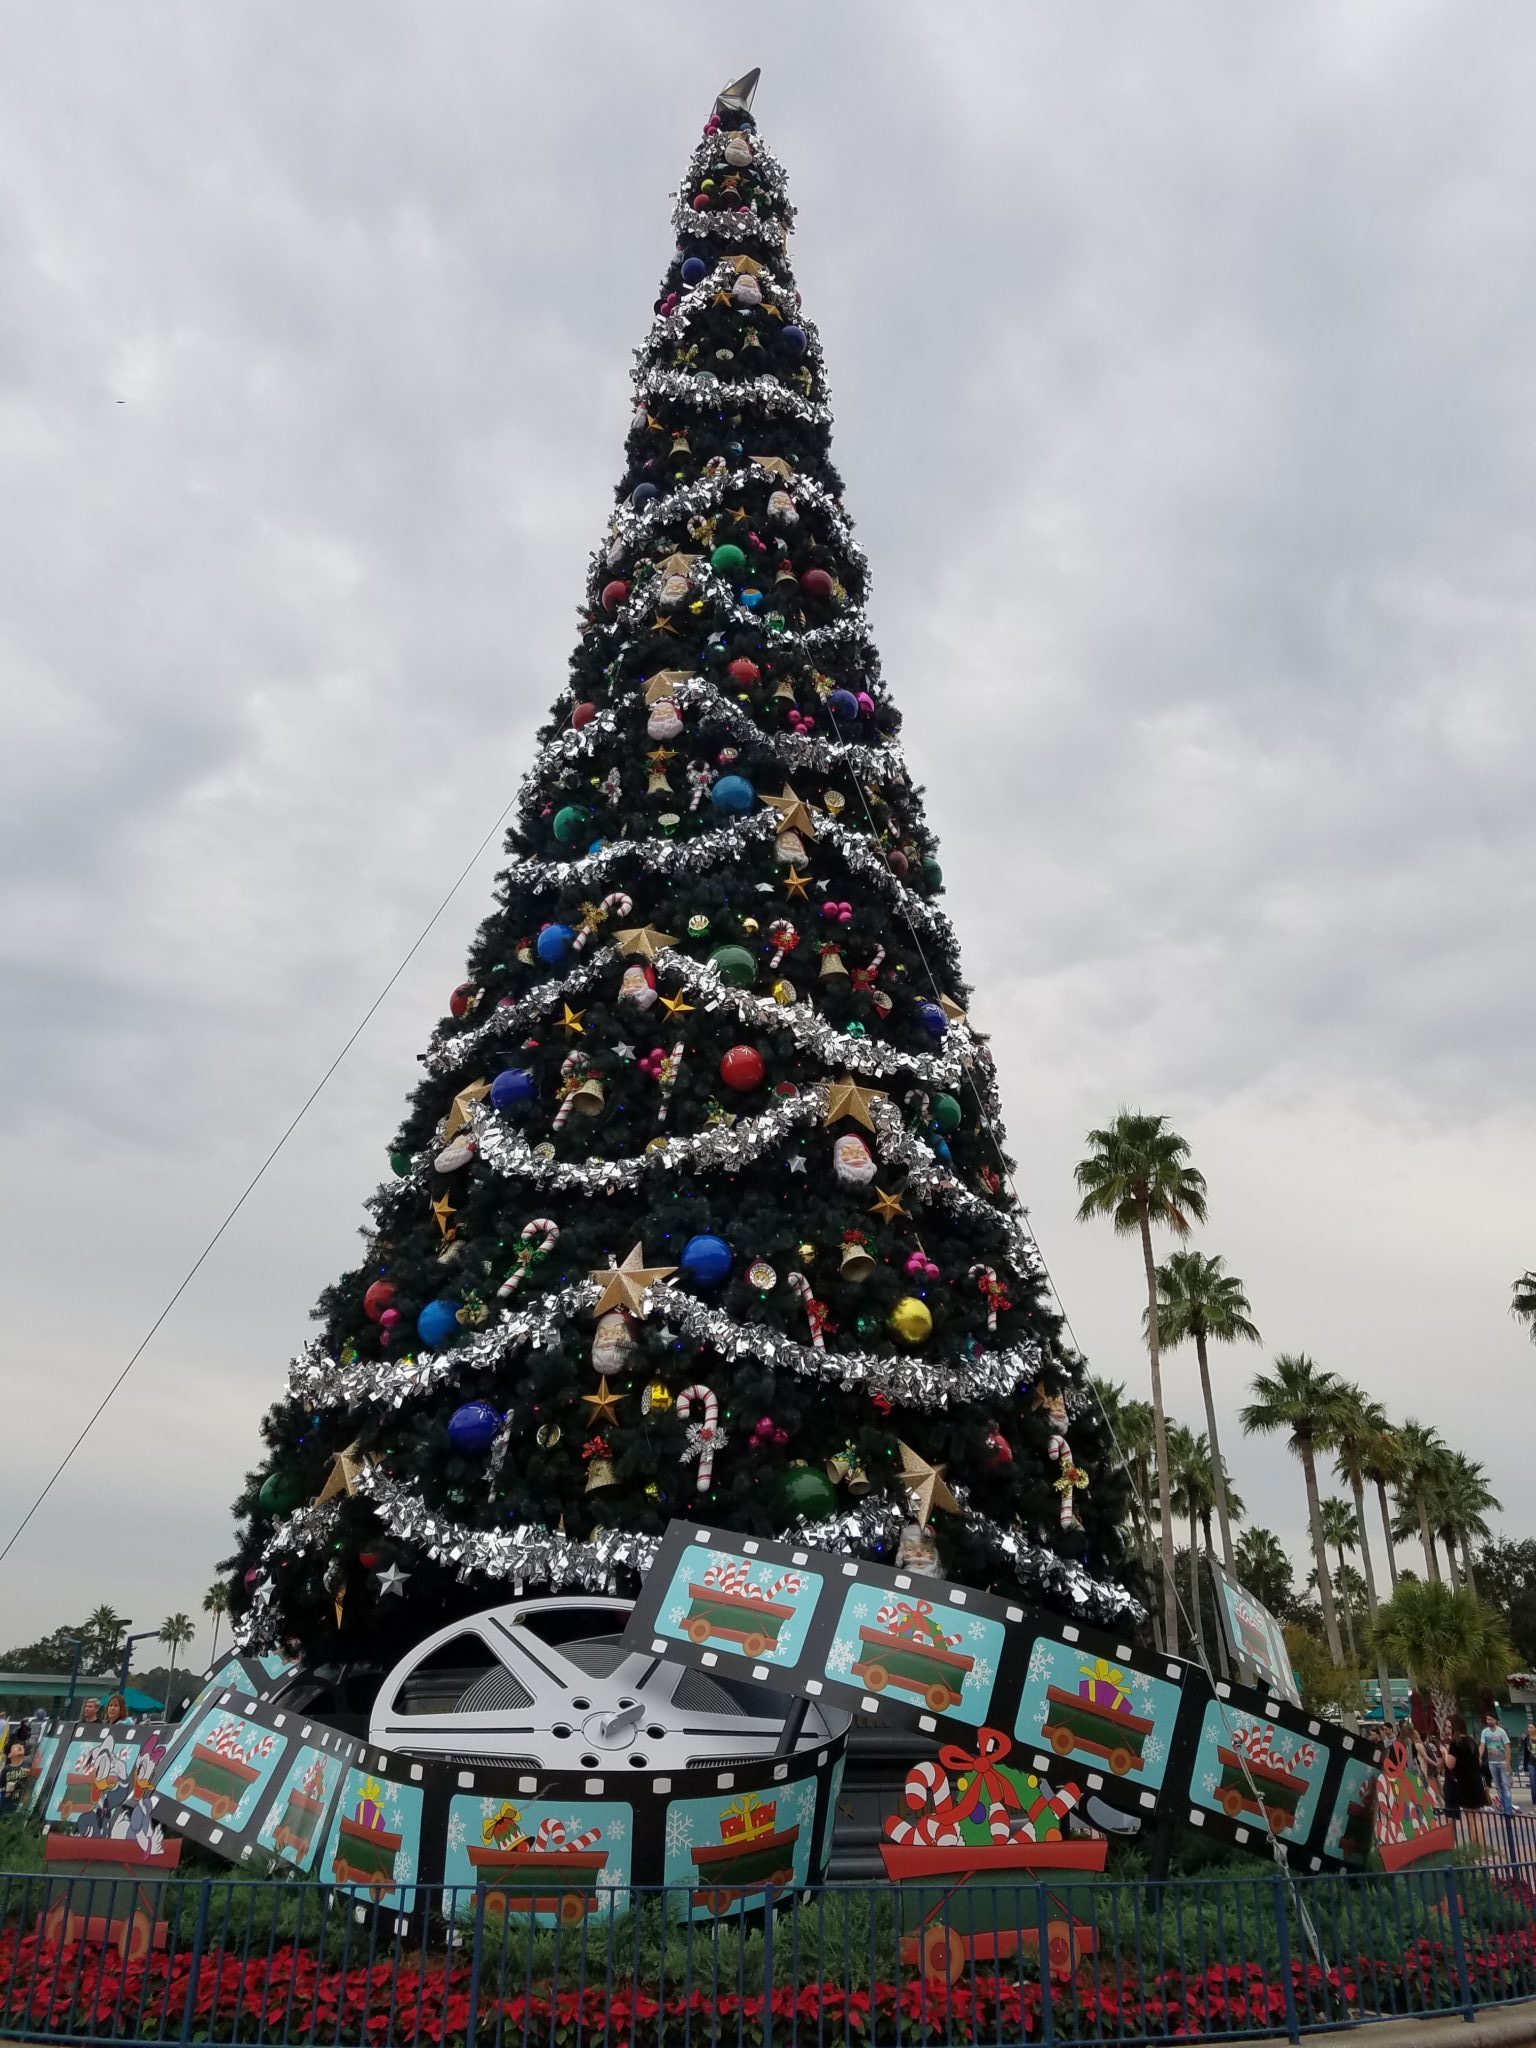 All is Merry, Wreath-y, and Brightly Beautiful At Disney’s Hollywood Studios This Holiday Season